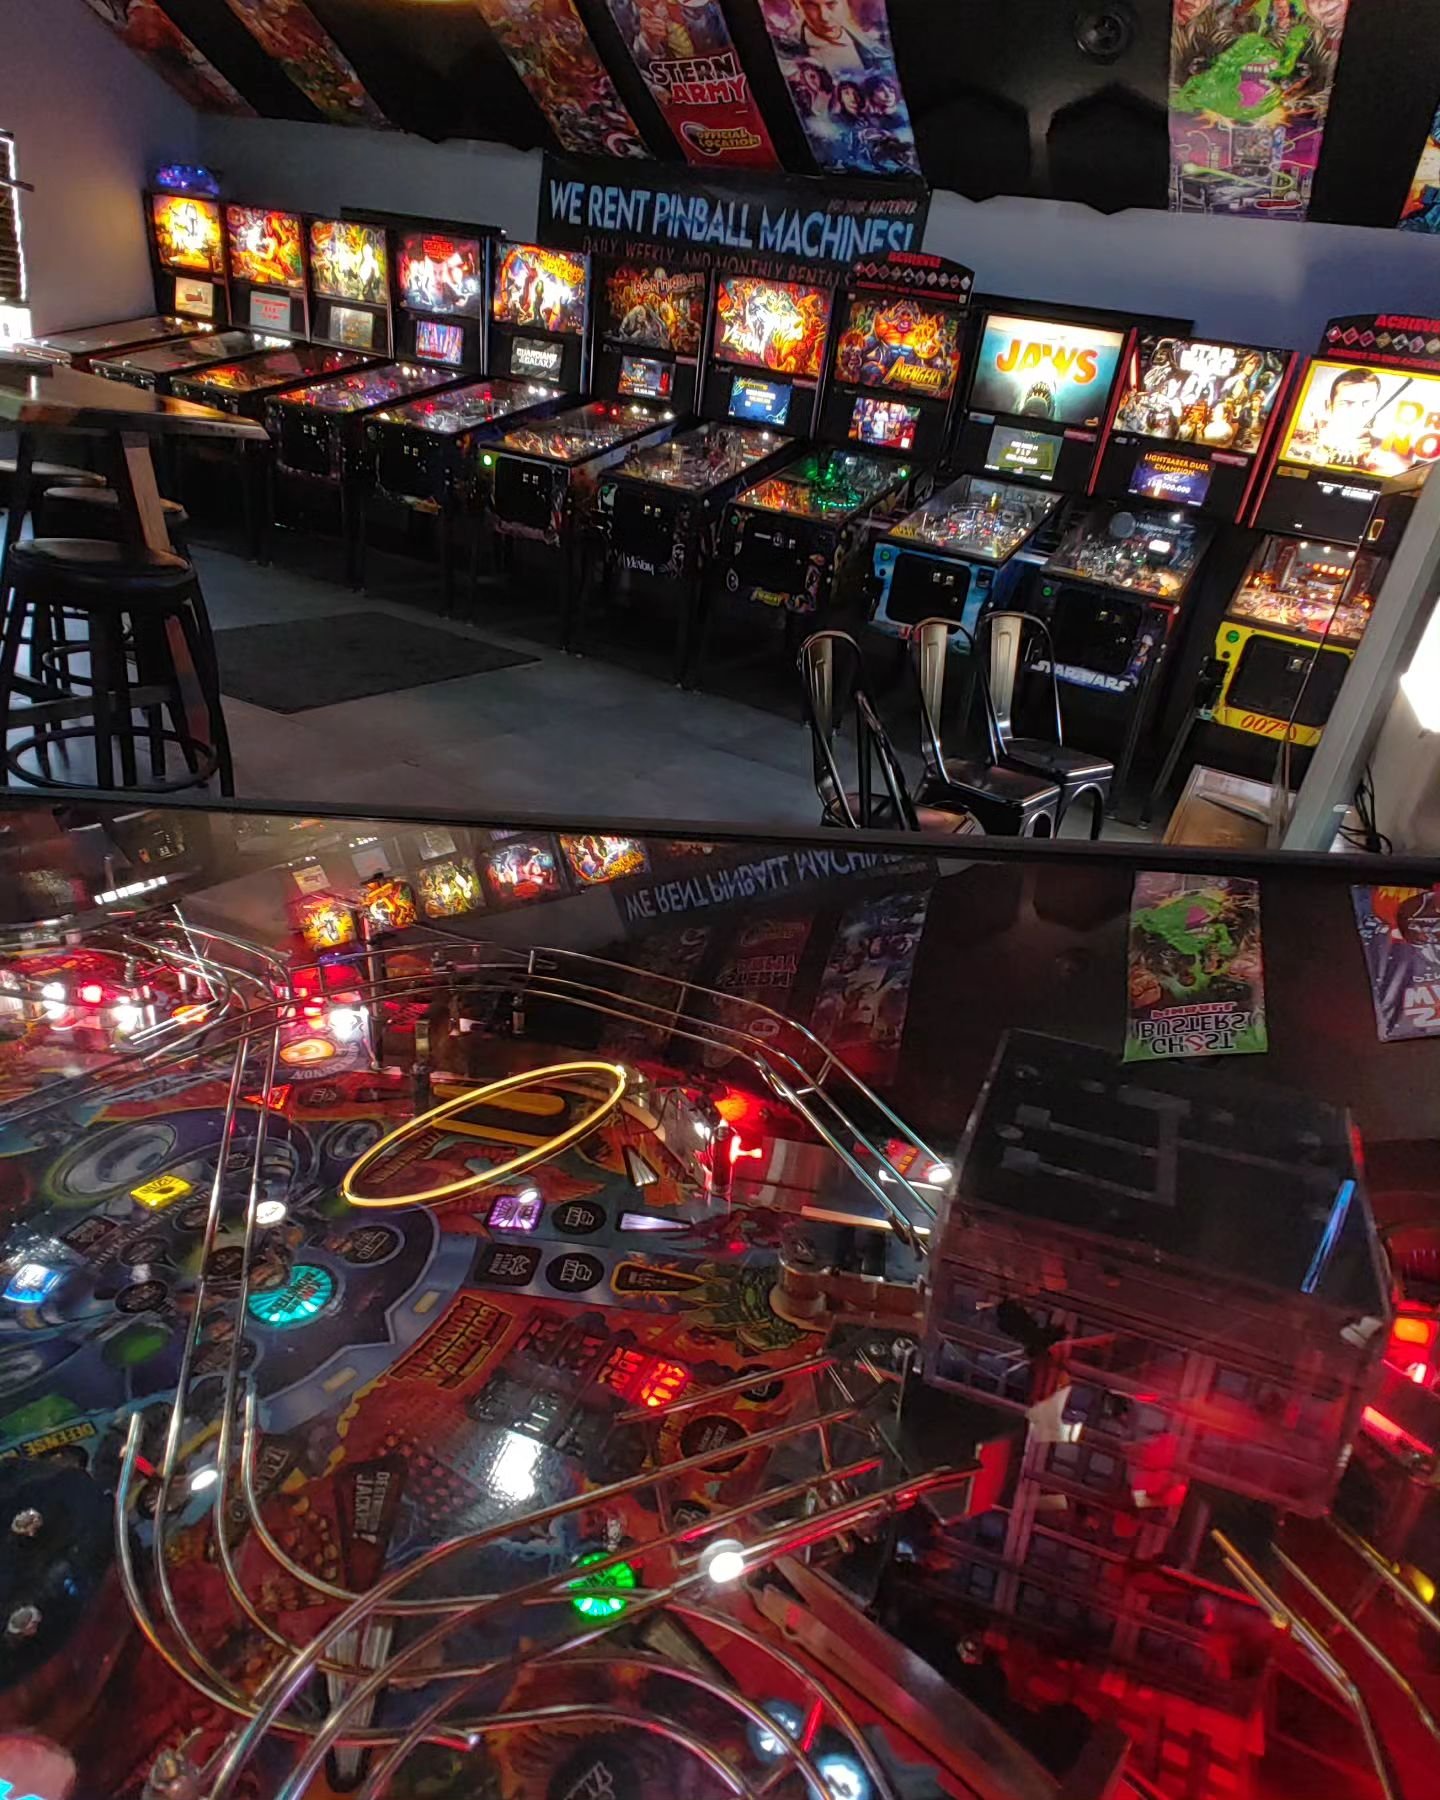 Make sure you make it to our monthly pinball tournaments every 1st and 3rd Wednesday. Thank you @sternpinball for making these amazing machines🙌🎮🕹️😎🍻

@sternpinball @ifpapinball @visitdunedinflorida @cityofdunedin @dunedinisawesome #arcades #pin